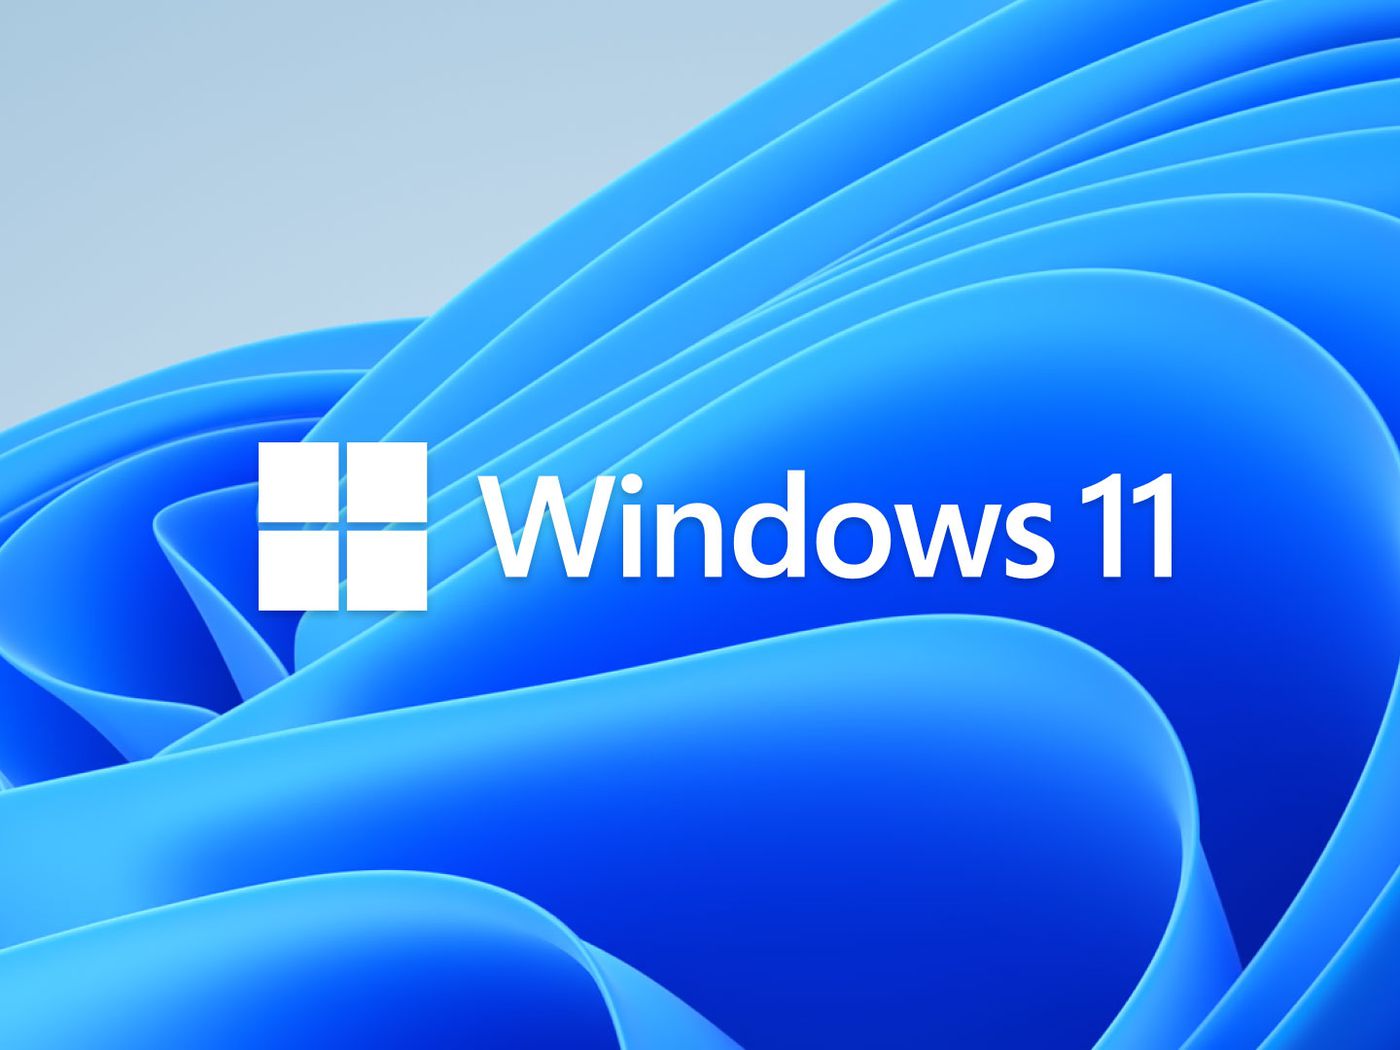 download windows 10 from windows 11